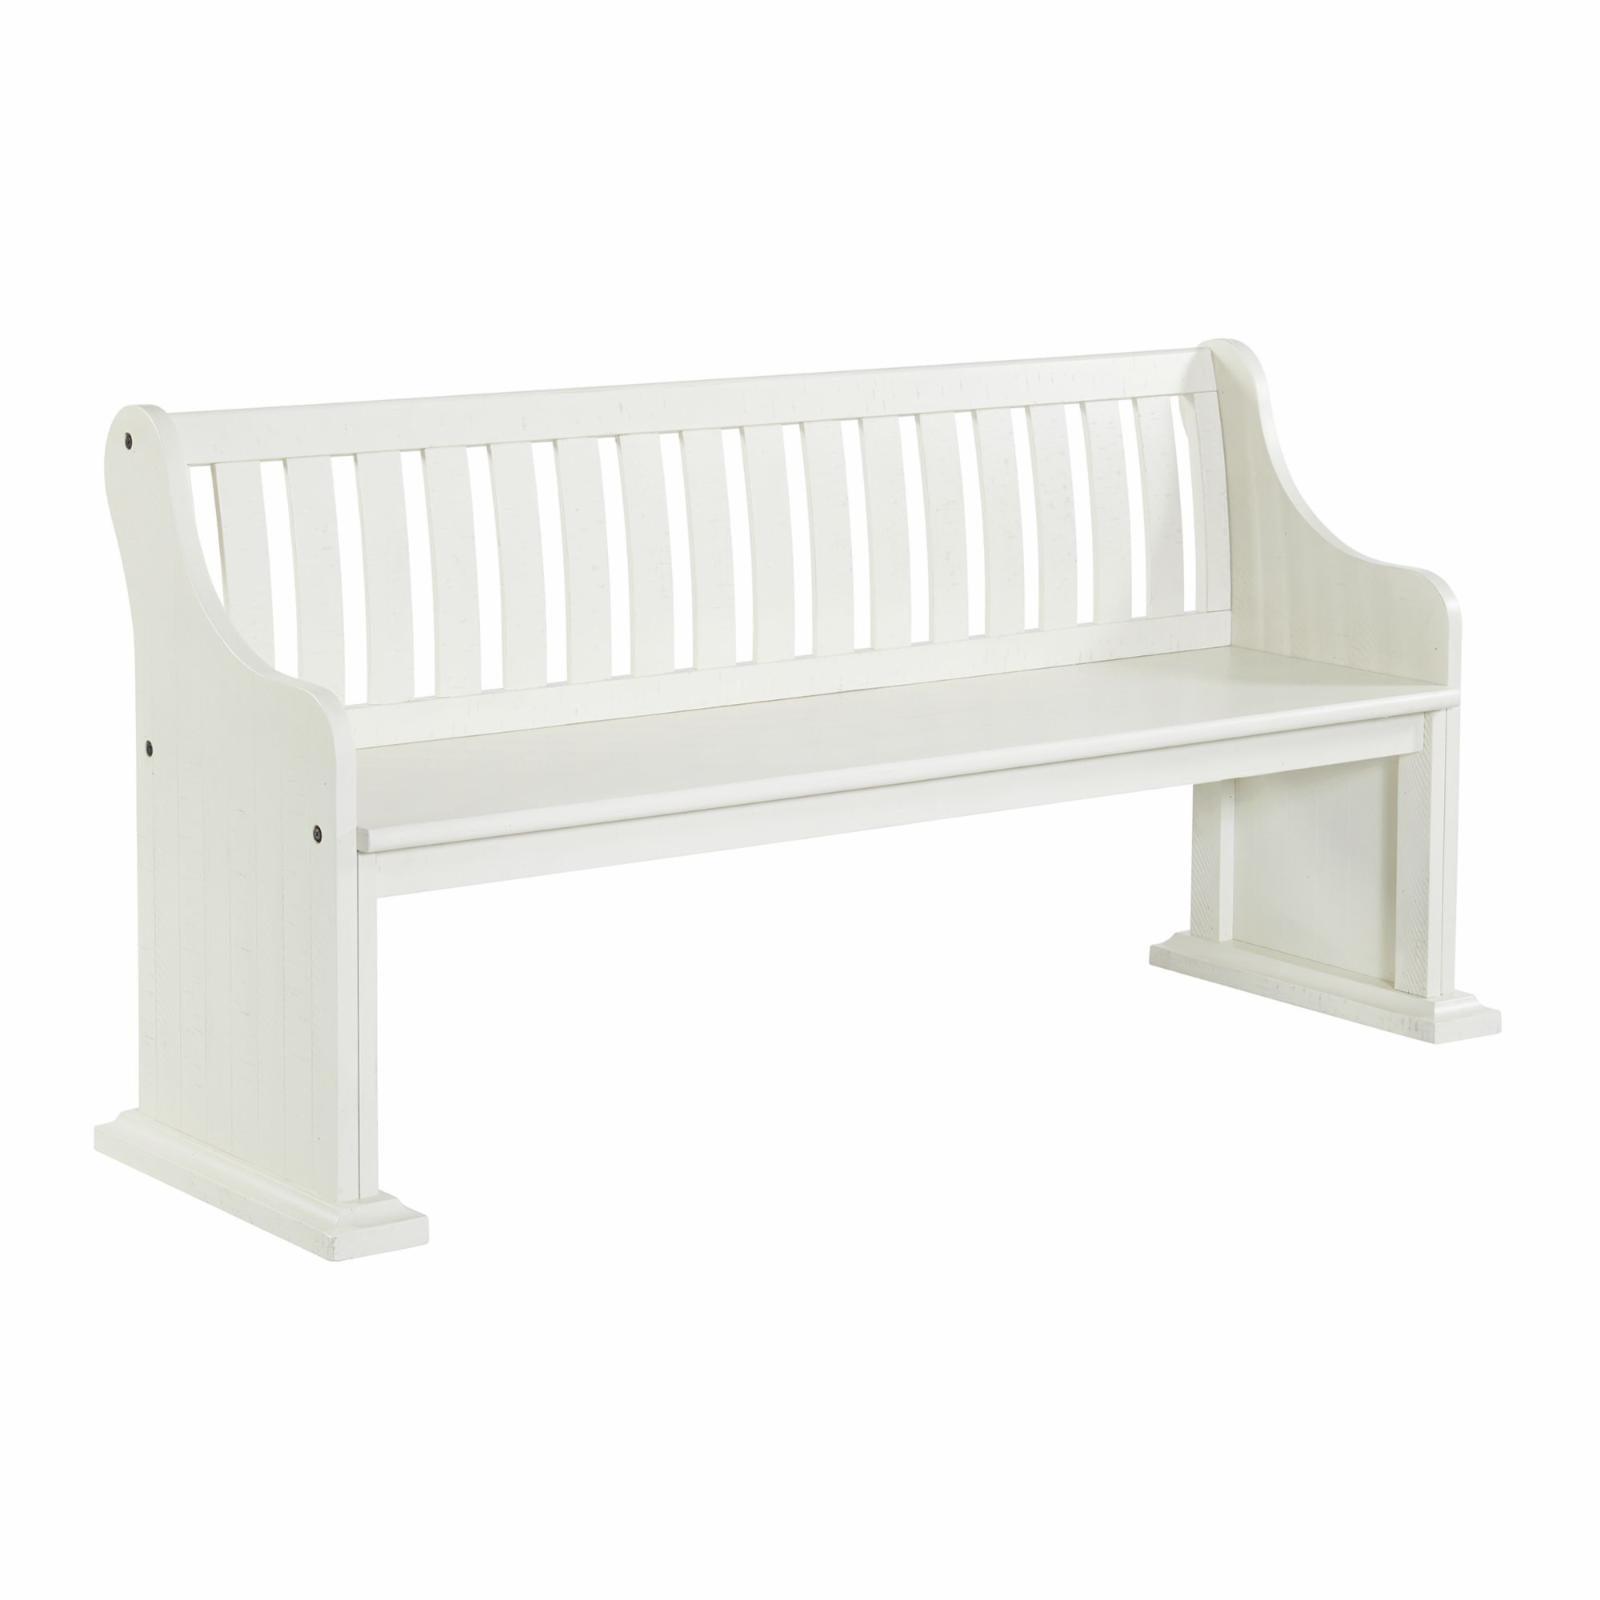 Rustic White Solid Wood 68" Pew Bench with Lath Back Design